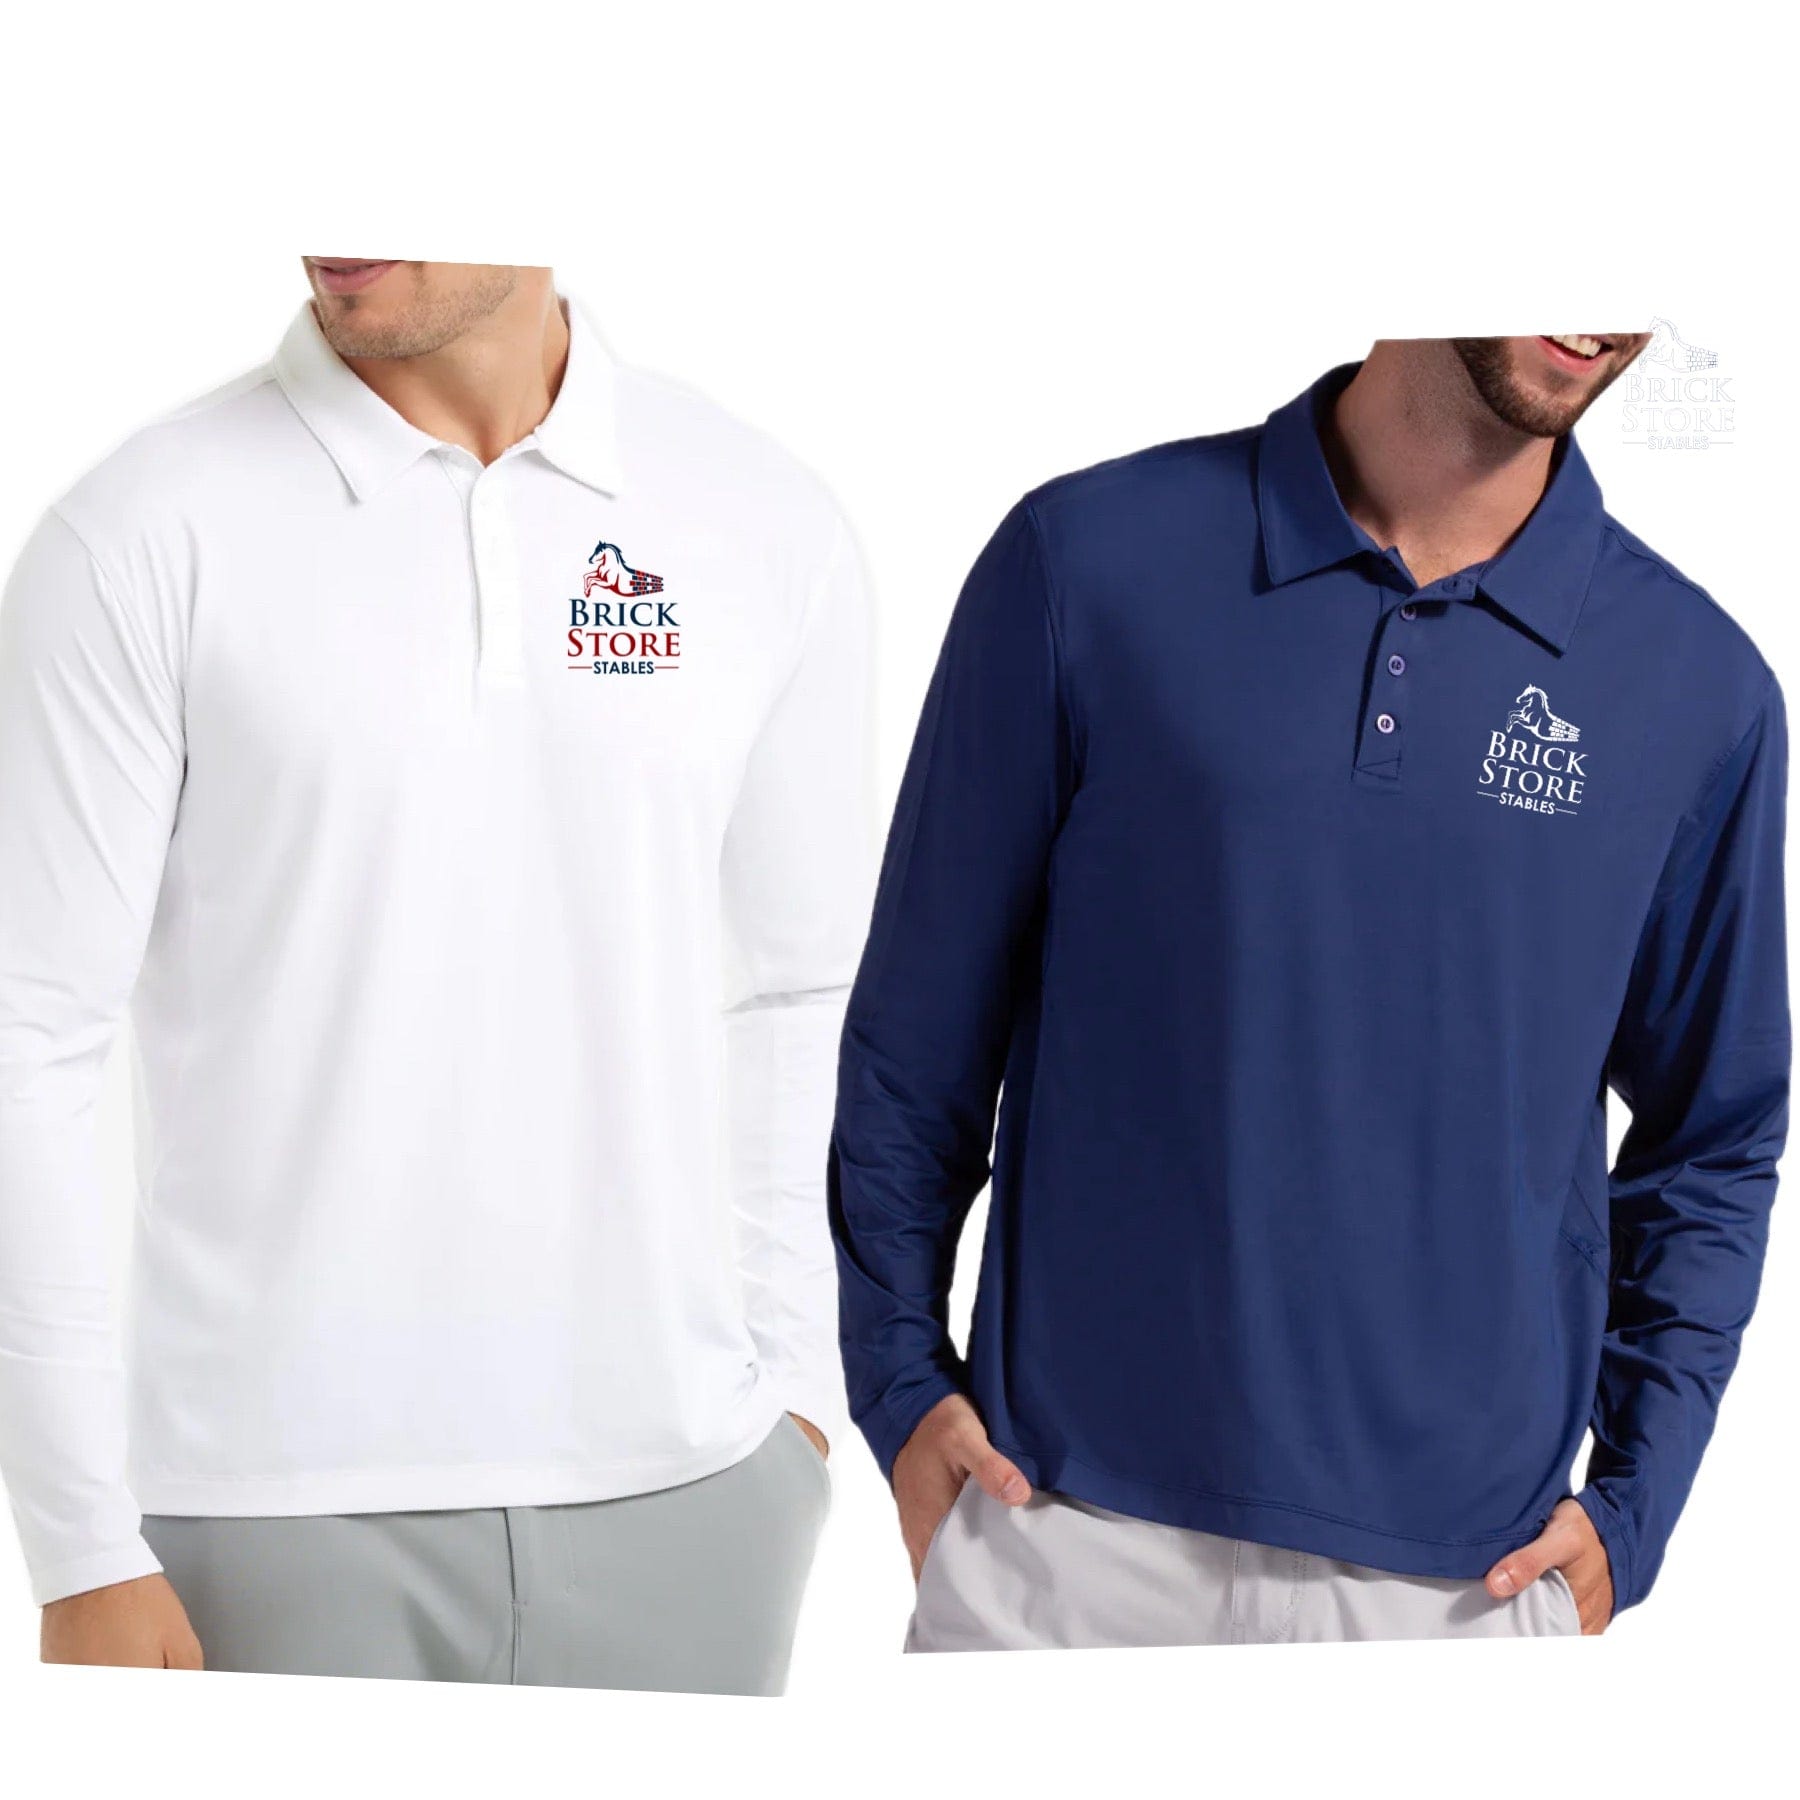 Equestrian Team Apparel Brick Store Stables Men's Sun Shirt equestrian team apparel online tack store mobile tack store custom farm apparel custom show stable clothing equestrian lifestyle horse show clothing riding clothes horses equestrian tack store